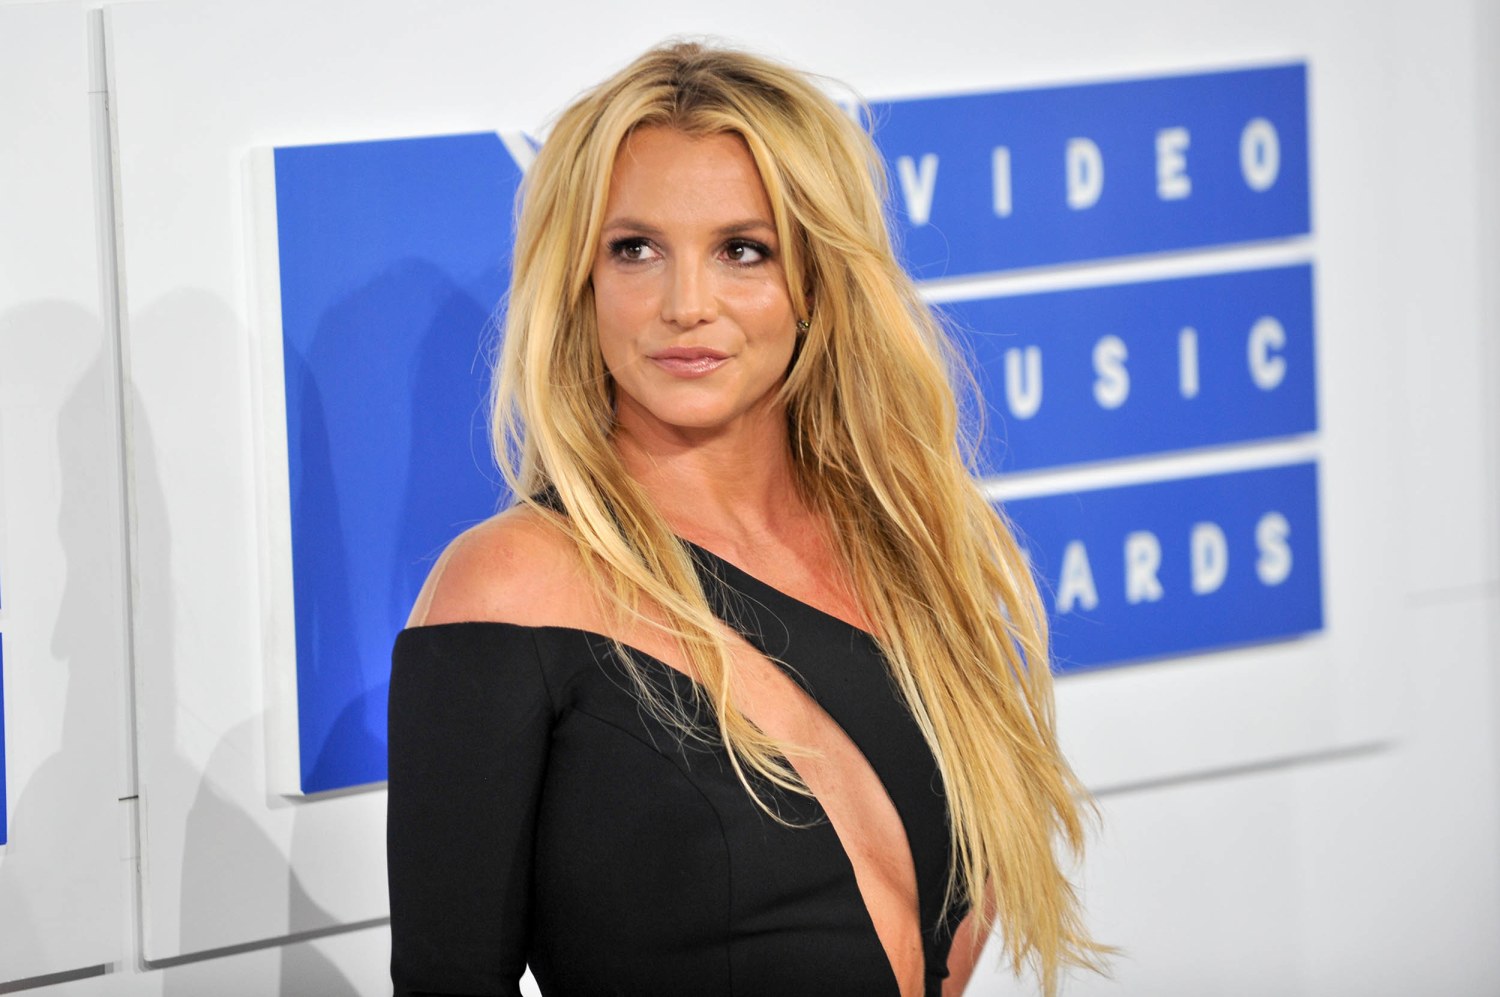 Could Britney Spears' memoir offer a blueprint for today's troubled pop  stars?